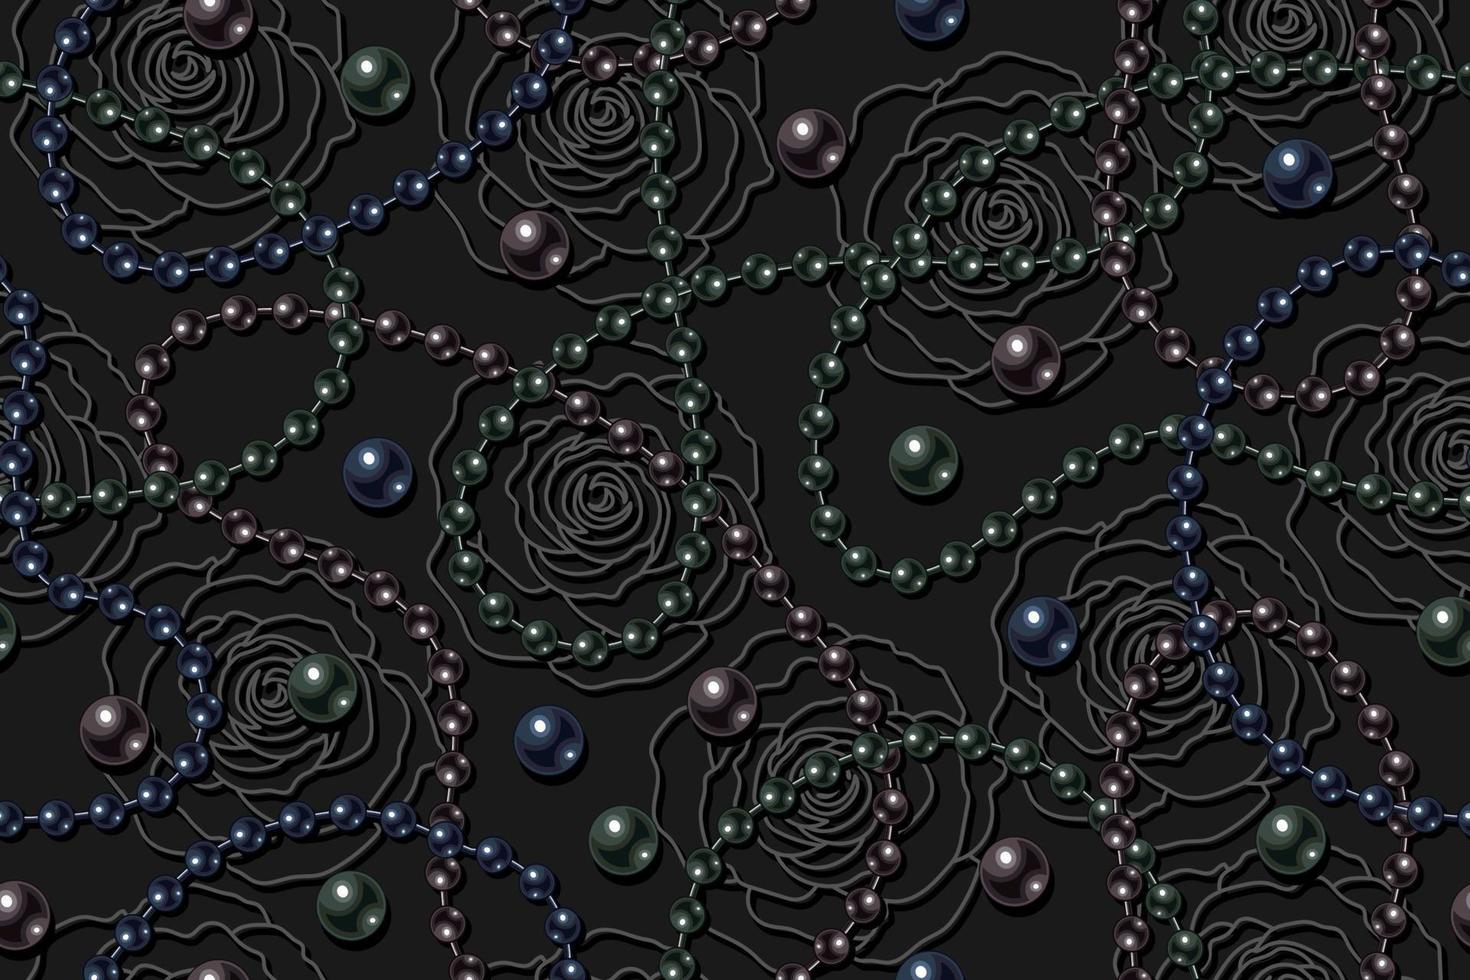 Seamless pattern with dark pearl beads, strings of black pearls, contour roses on black background. Wavy lines, classic black colors of pearls. Vector illustration